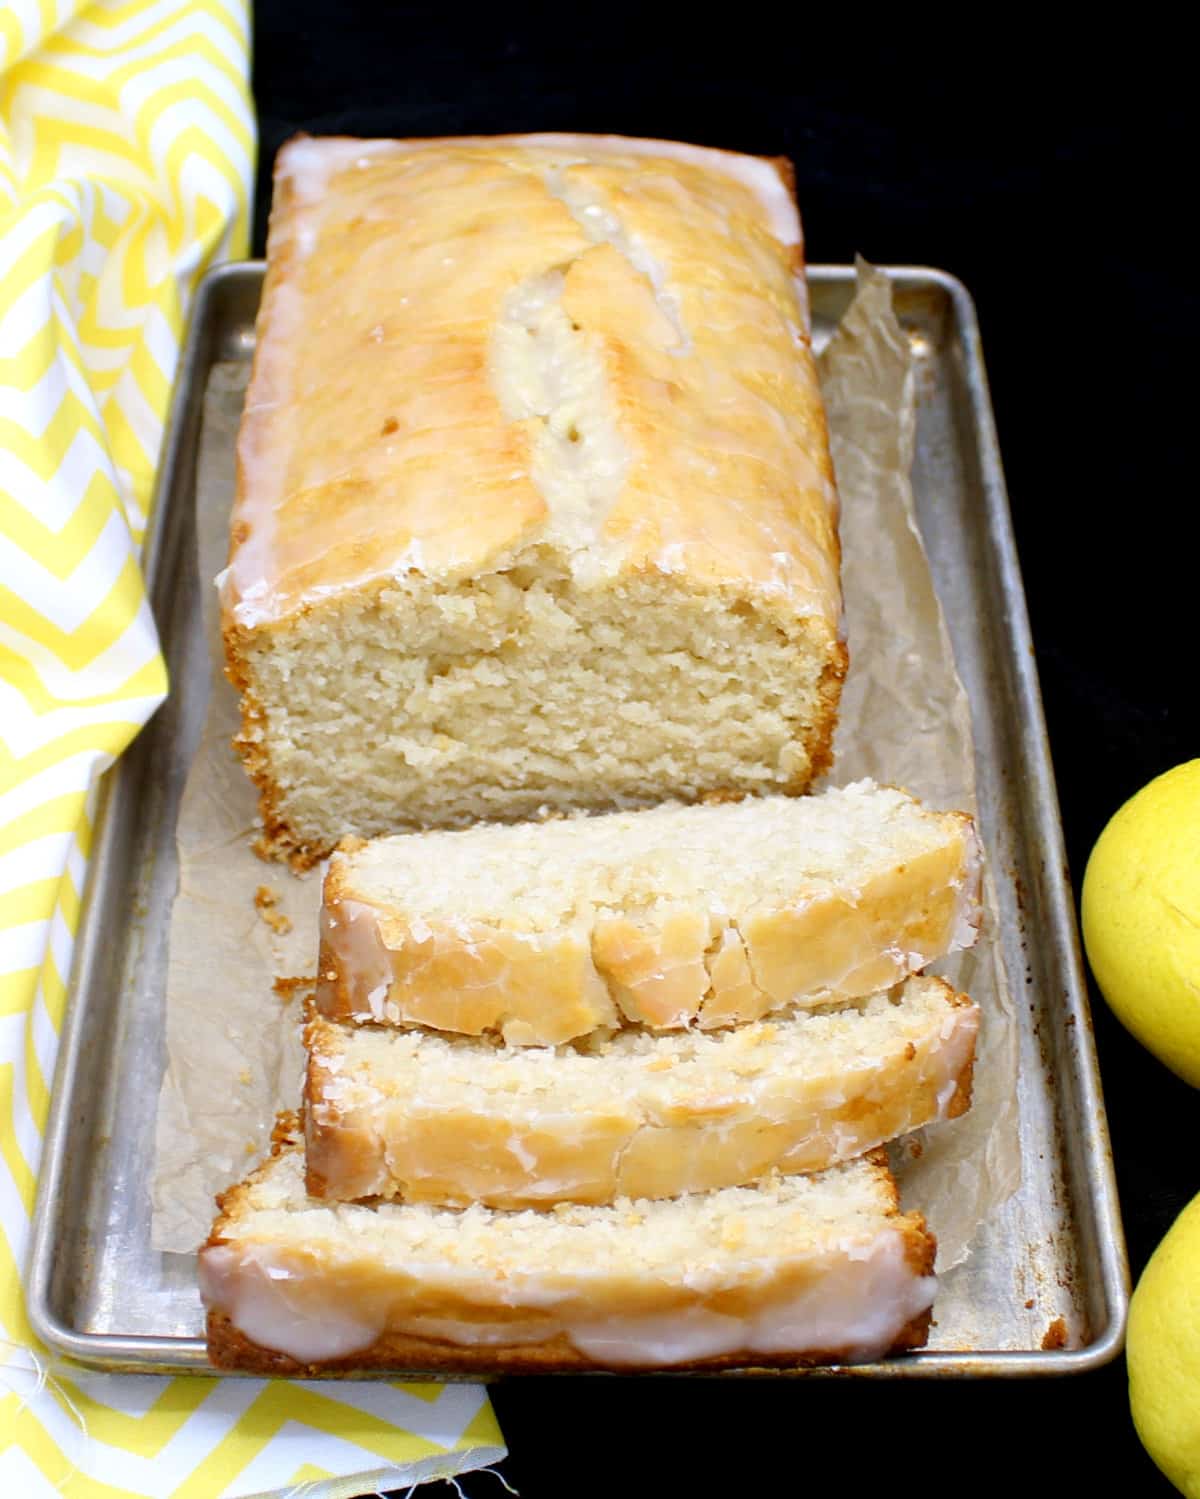 A loaf of buttery vegan lemon pound cake on a metal baking tray with slices cut in front of it and showing the dense, soft crumb. Next to it are lemons and a yellow and white napkin.